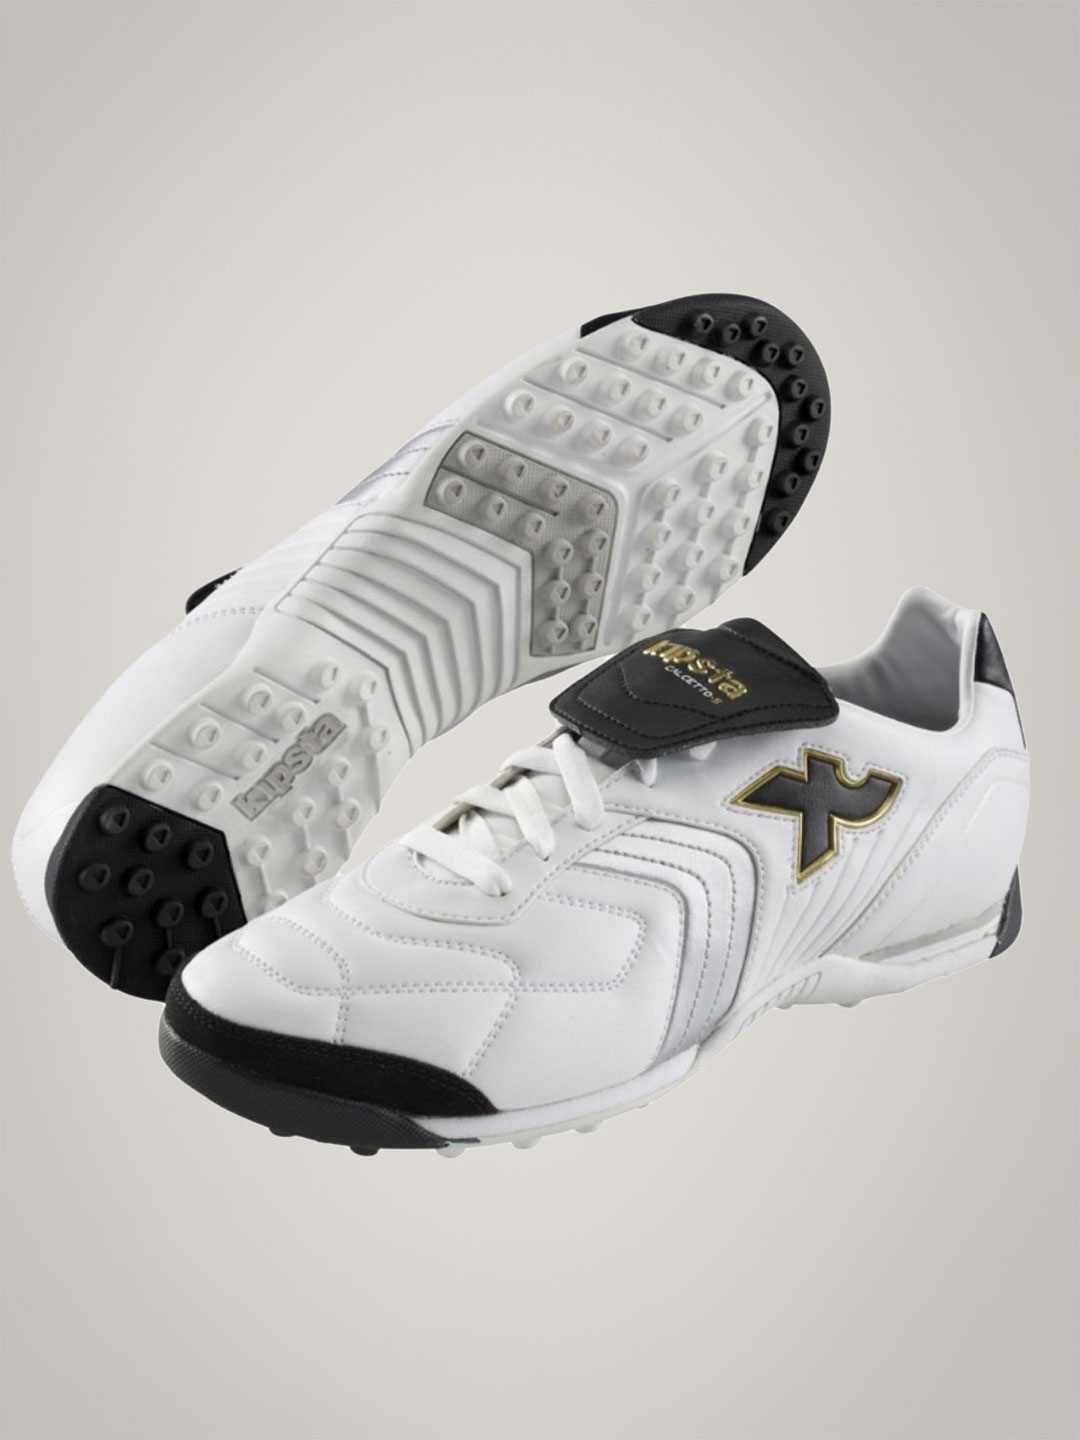 Buy Kipsta Calcetto 5 Sr White Sports Shoes for Men 5358 Myntra